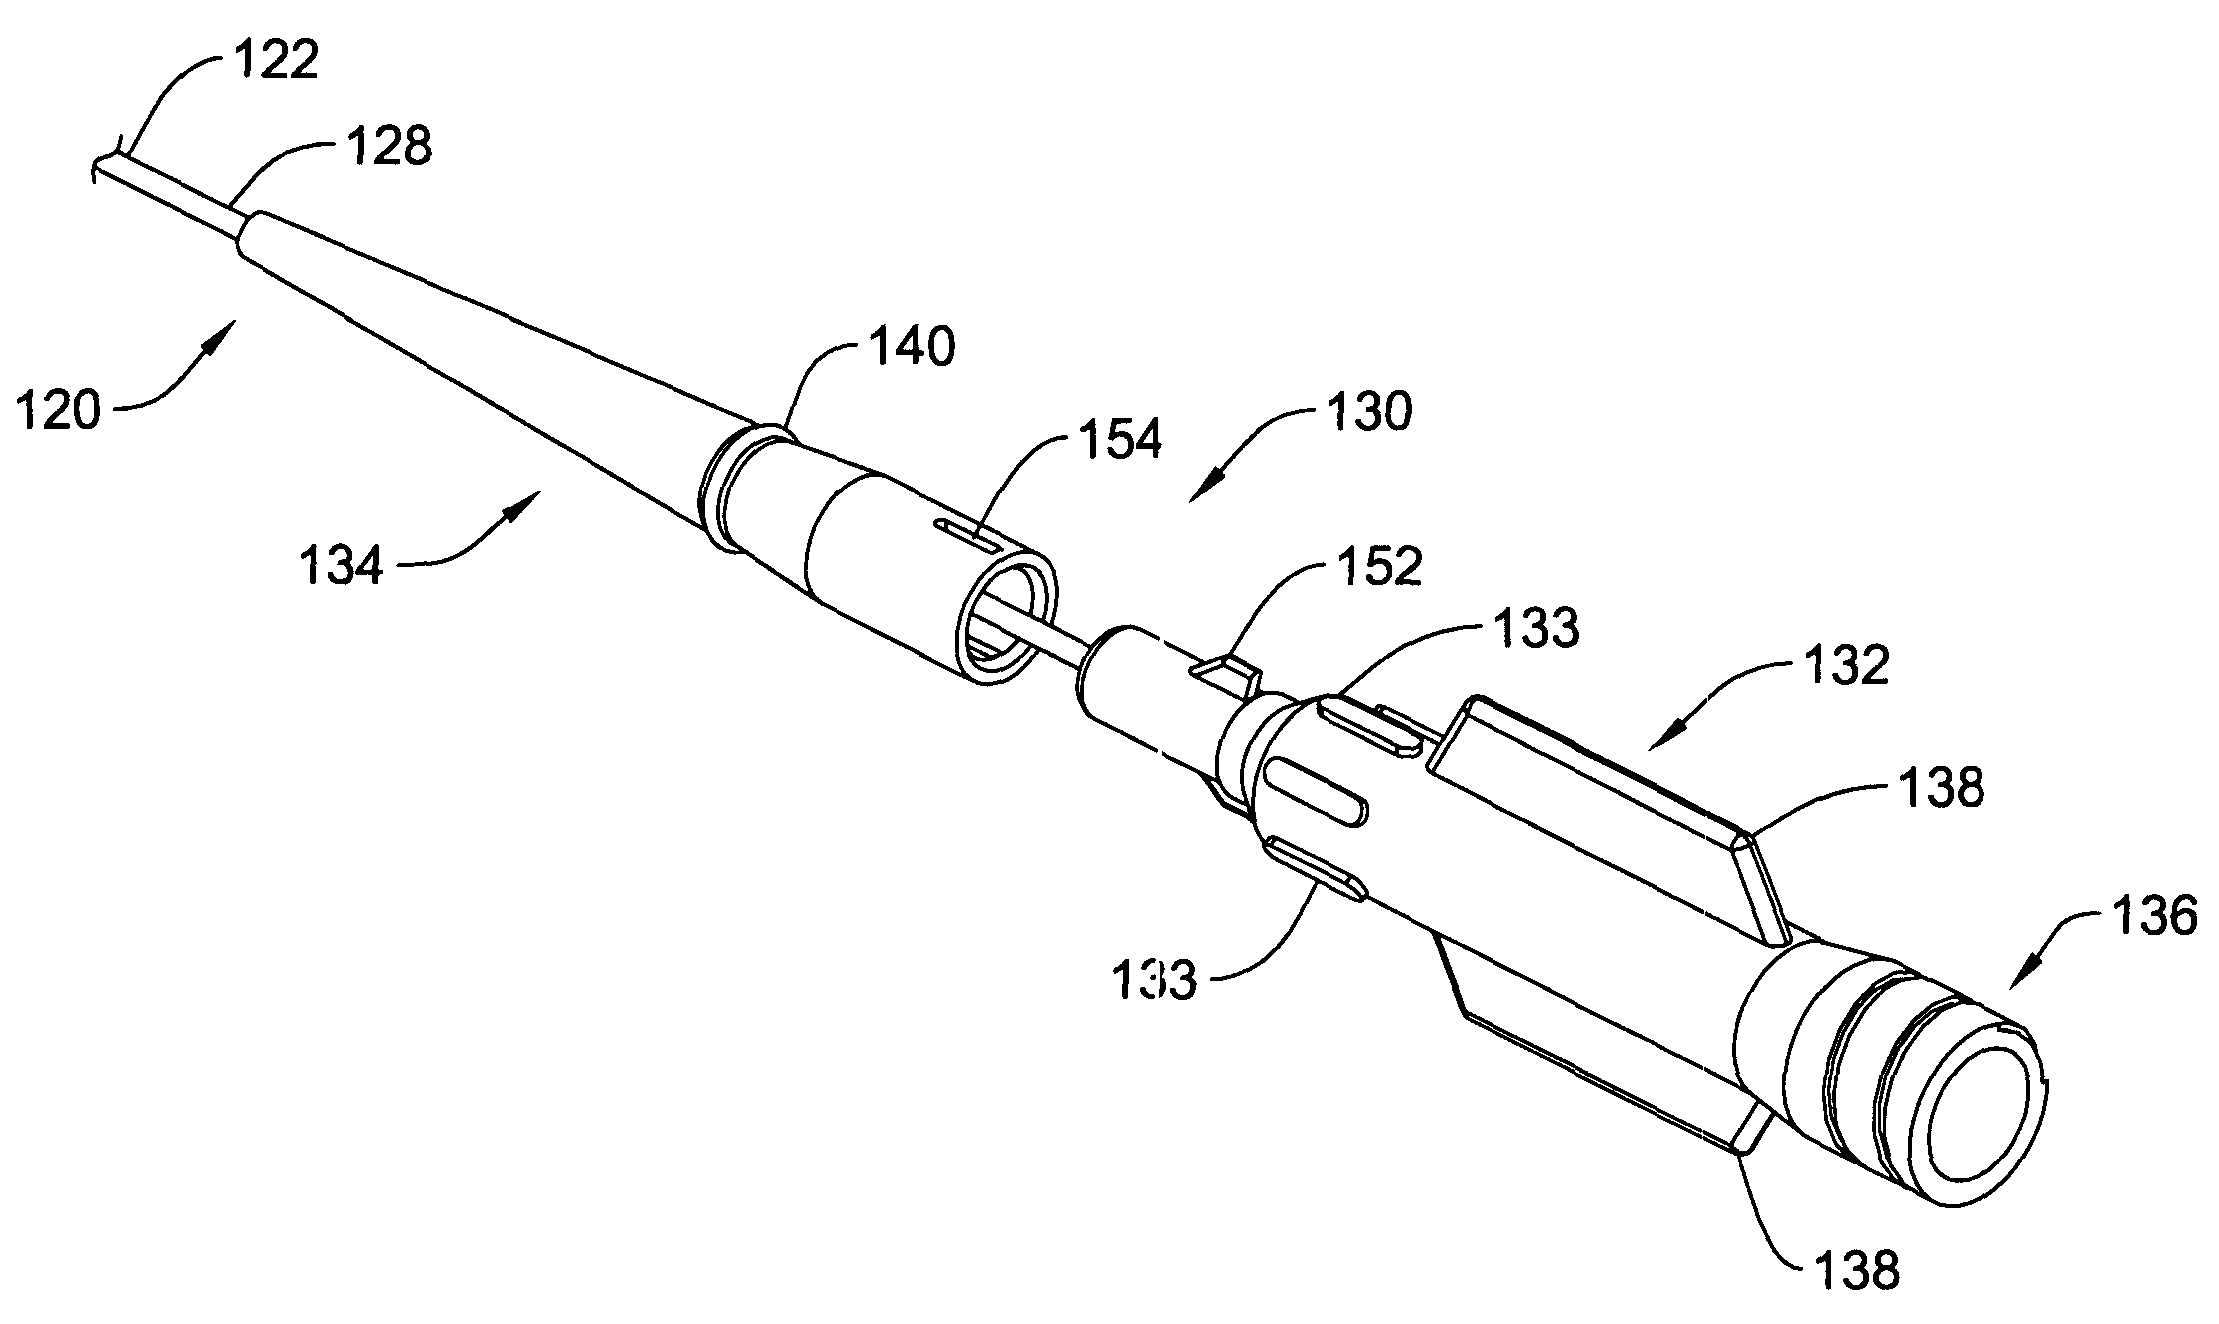 Elongate medical device having an interference fit packaging member